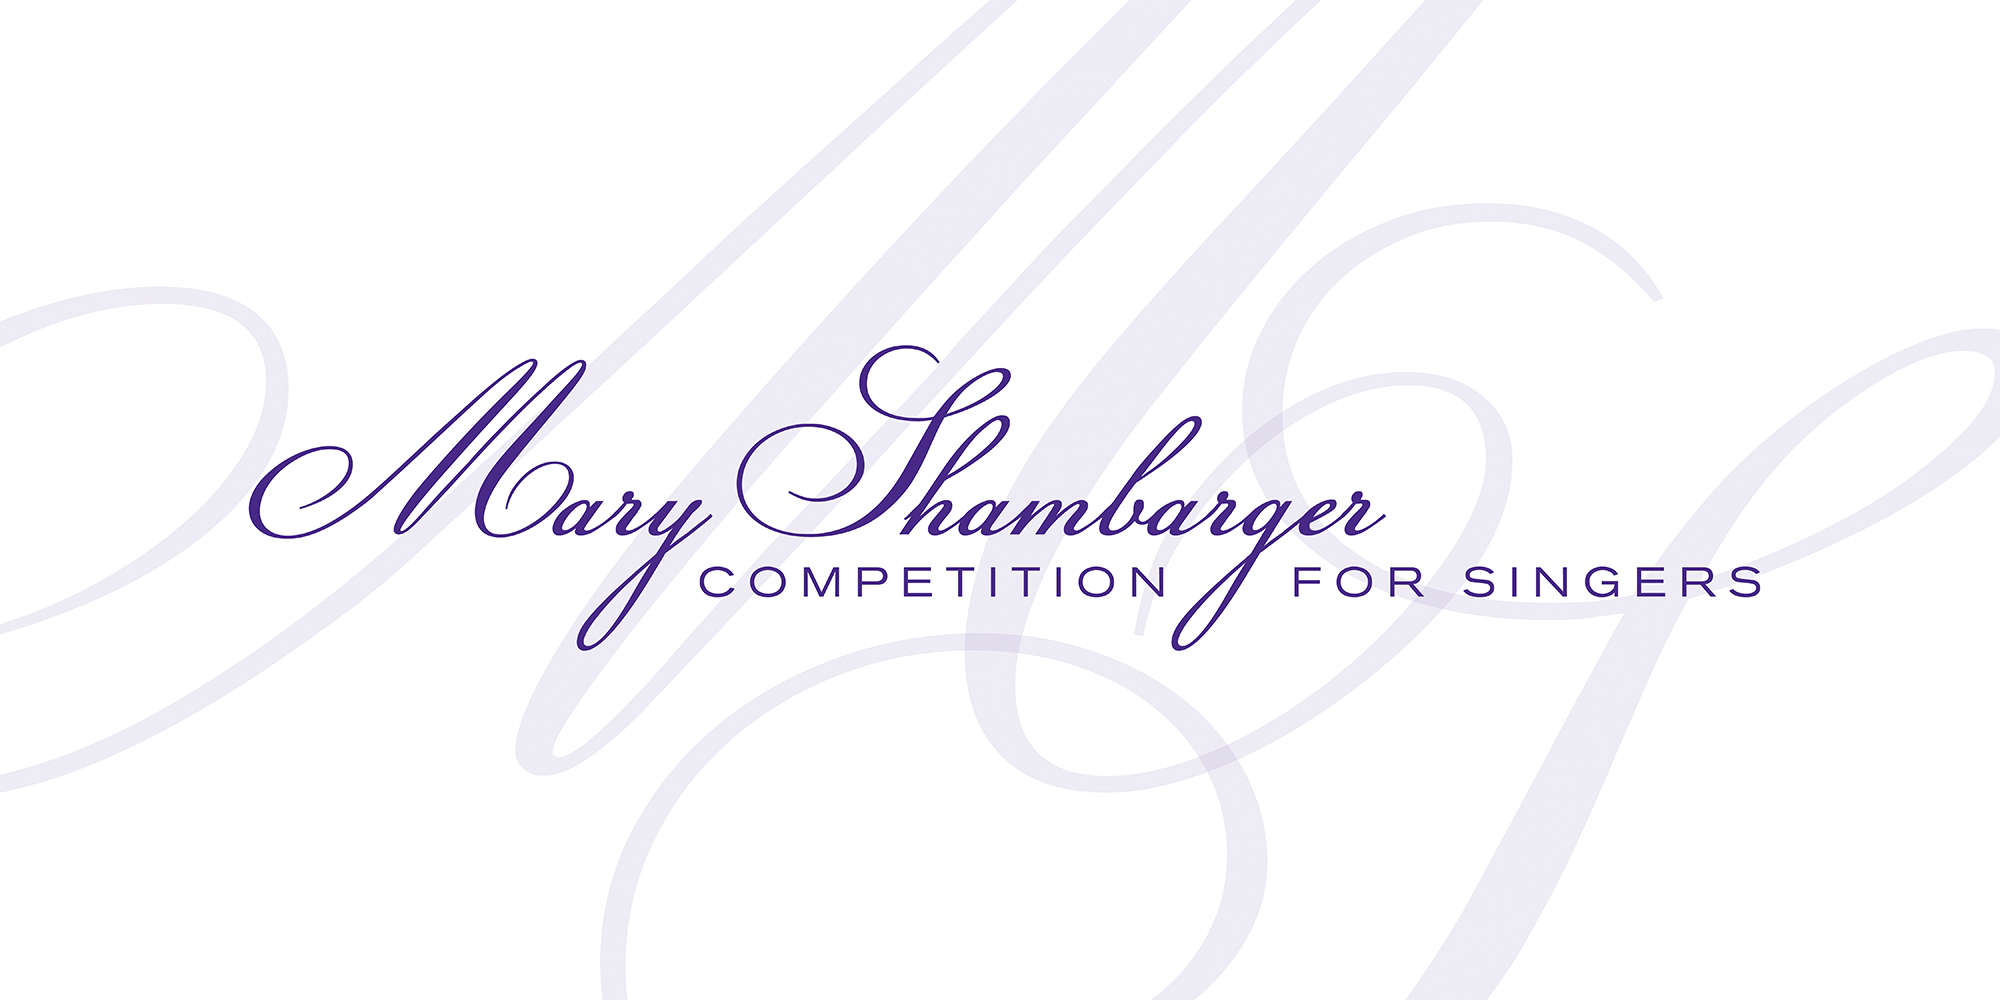 Ouachita to host Shambarger Competition for Singers and anniversary concert Feb. 20.